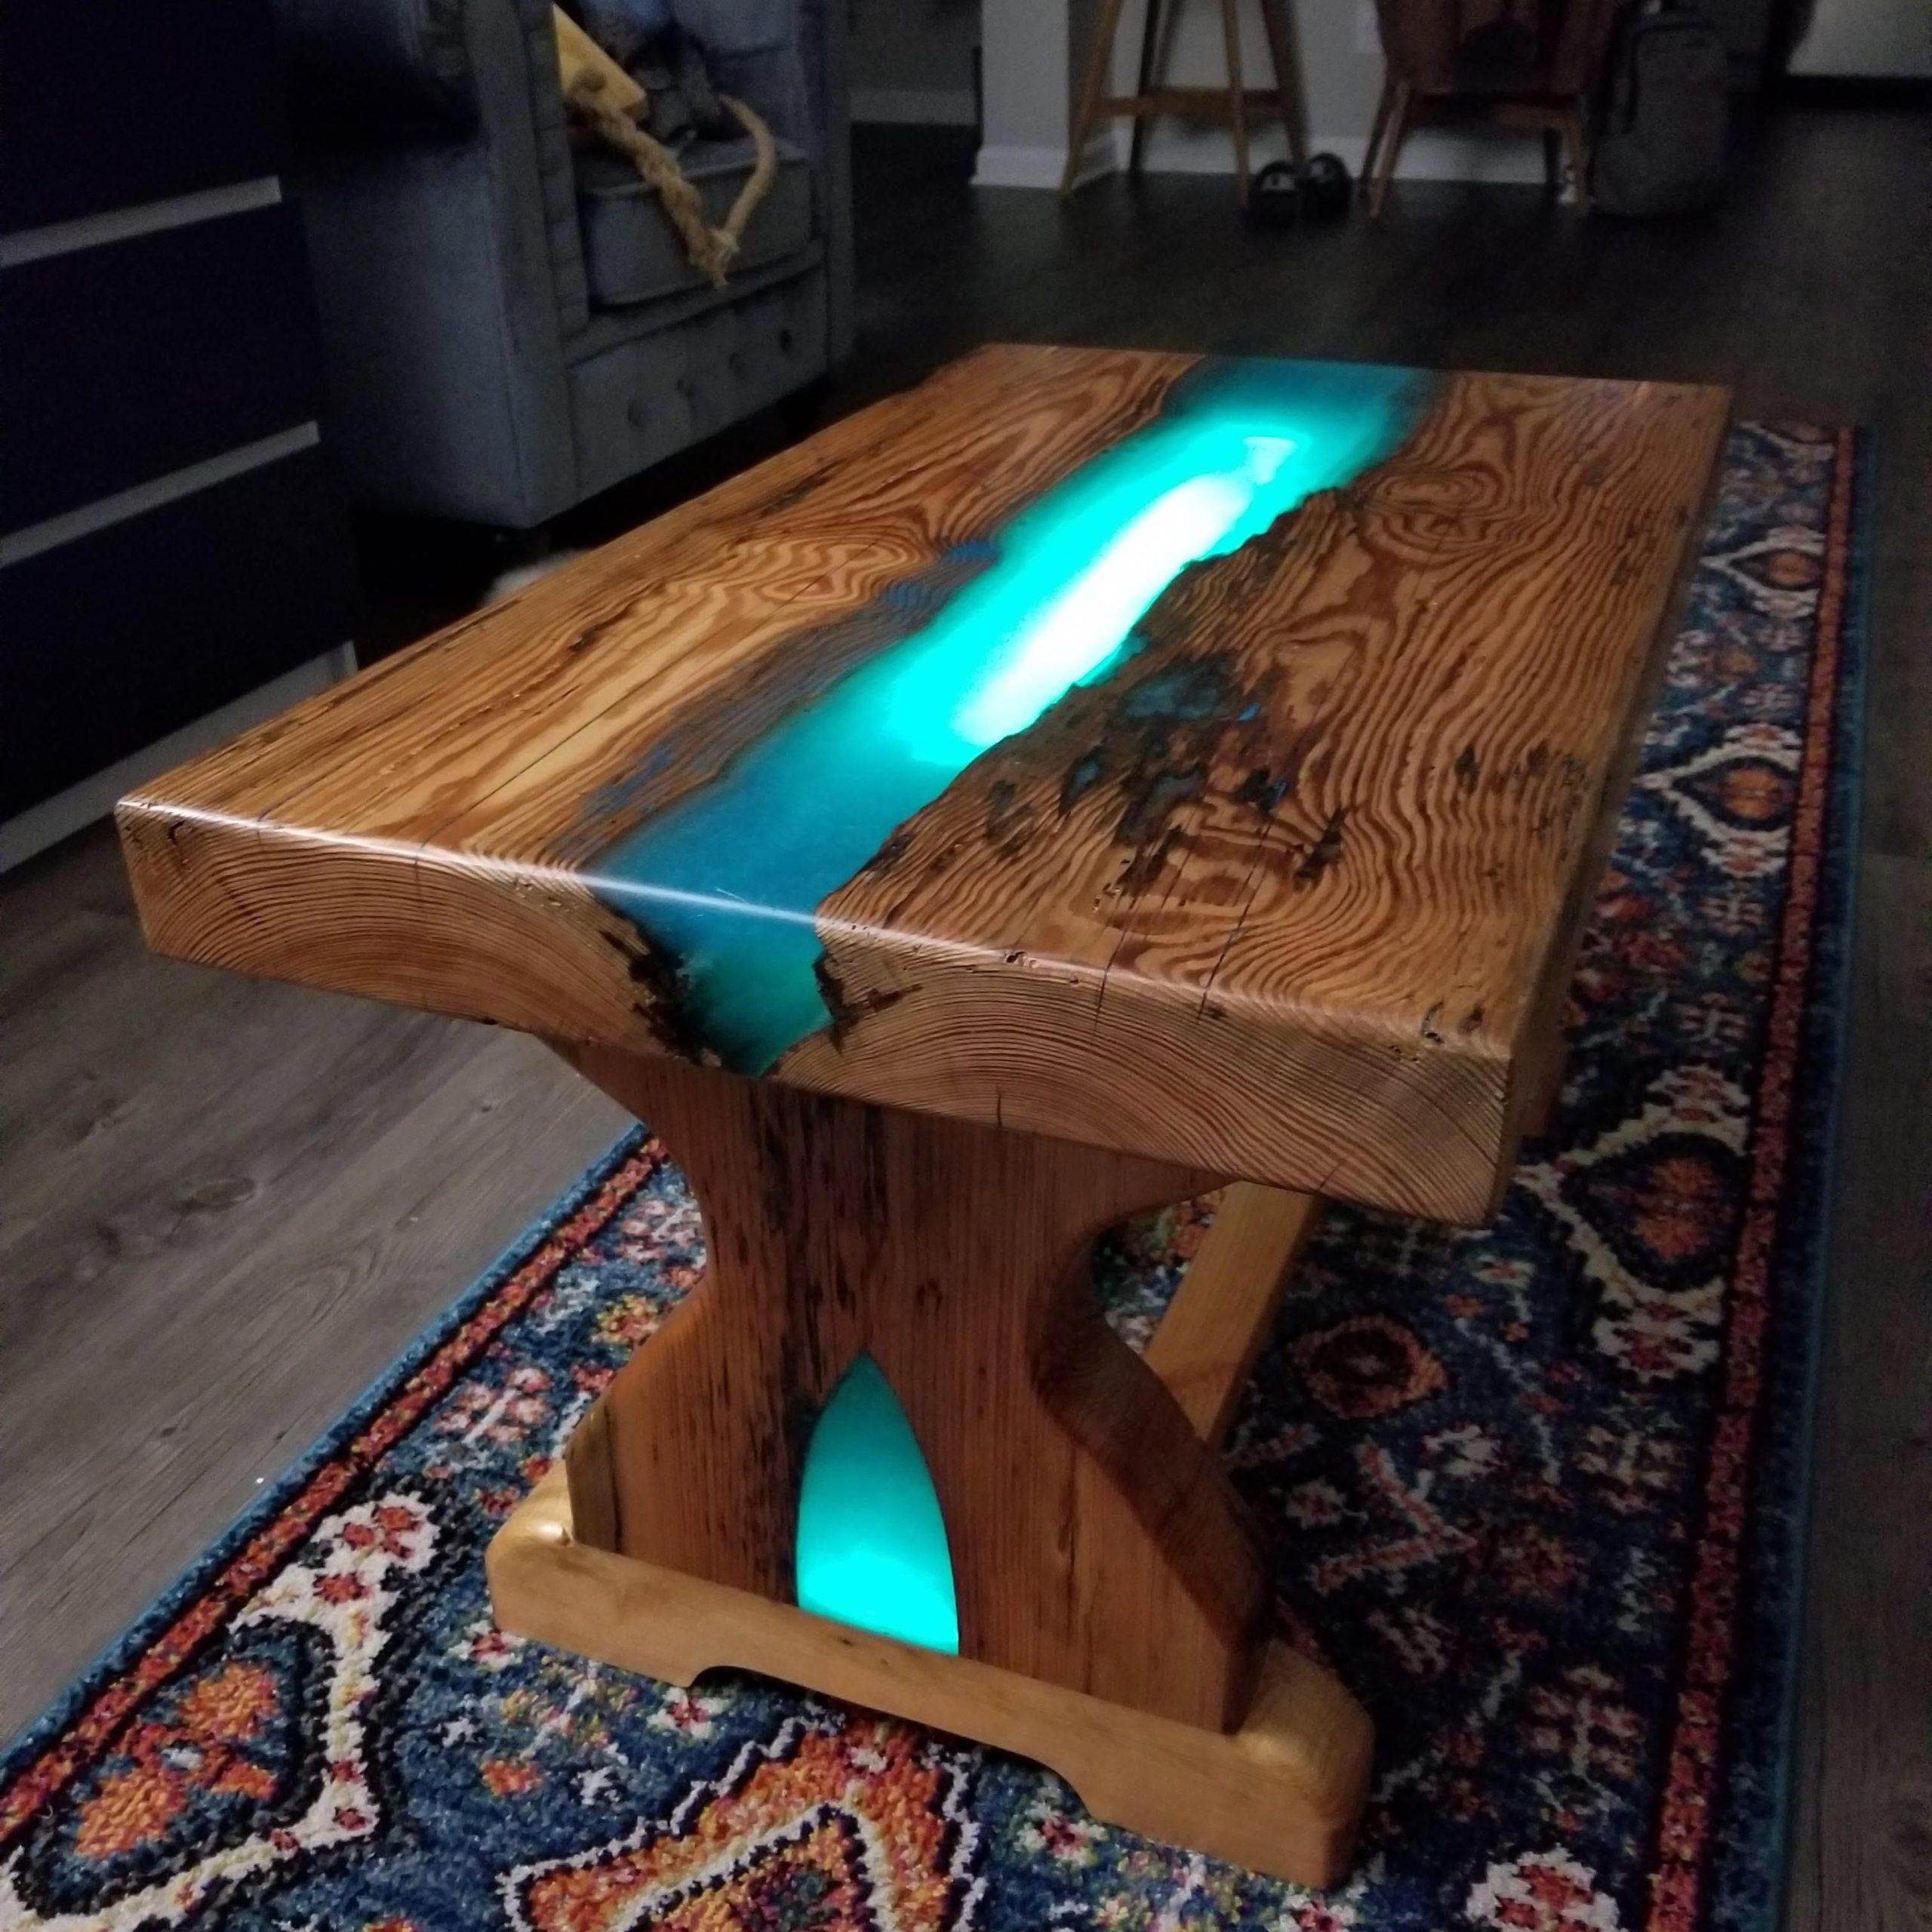 This Led Lit Coffee Table My Girlfriend's Dad Built For Us # For Coffee Tables With Led Lights (View 13 of 20)